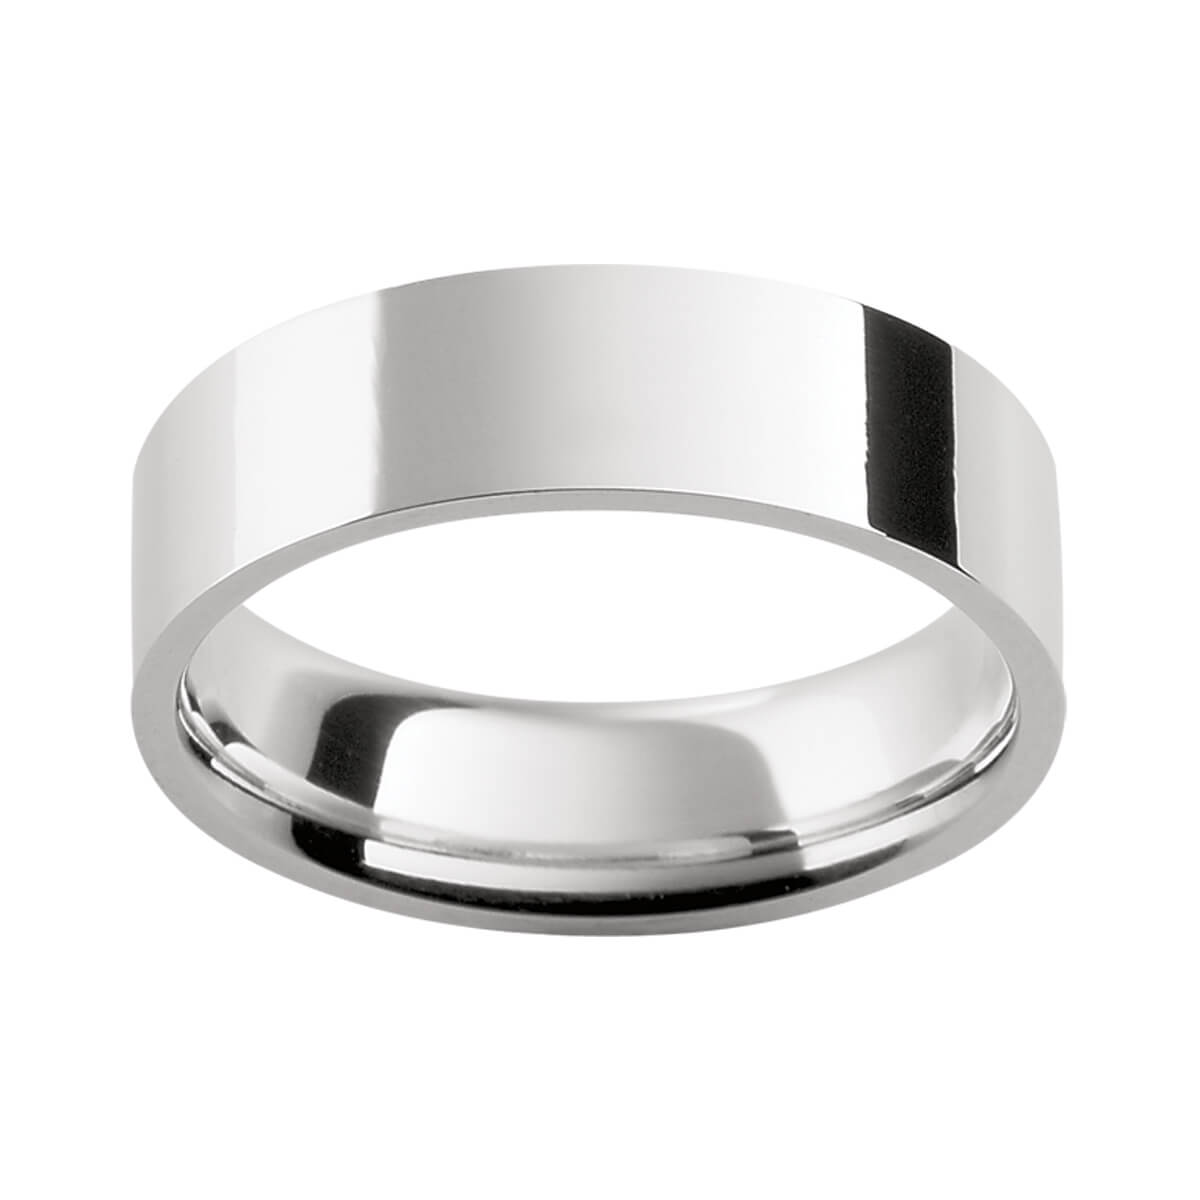 FLAT men's ring plain flat band with contour fit